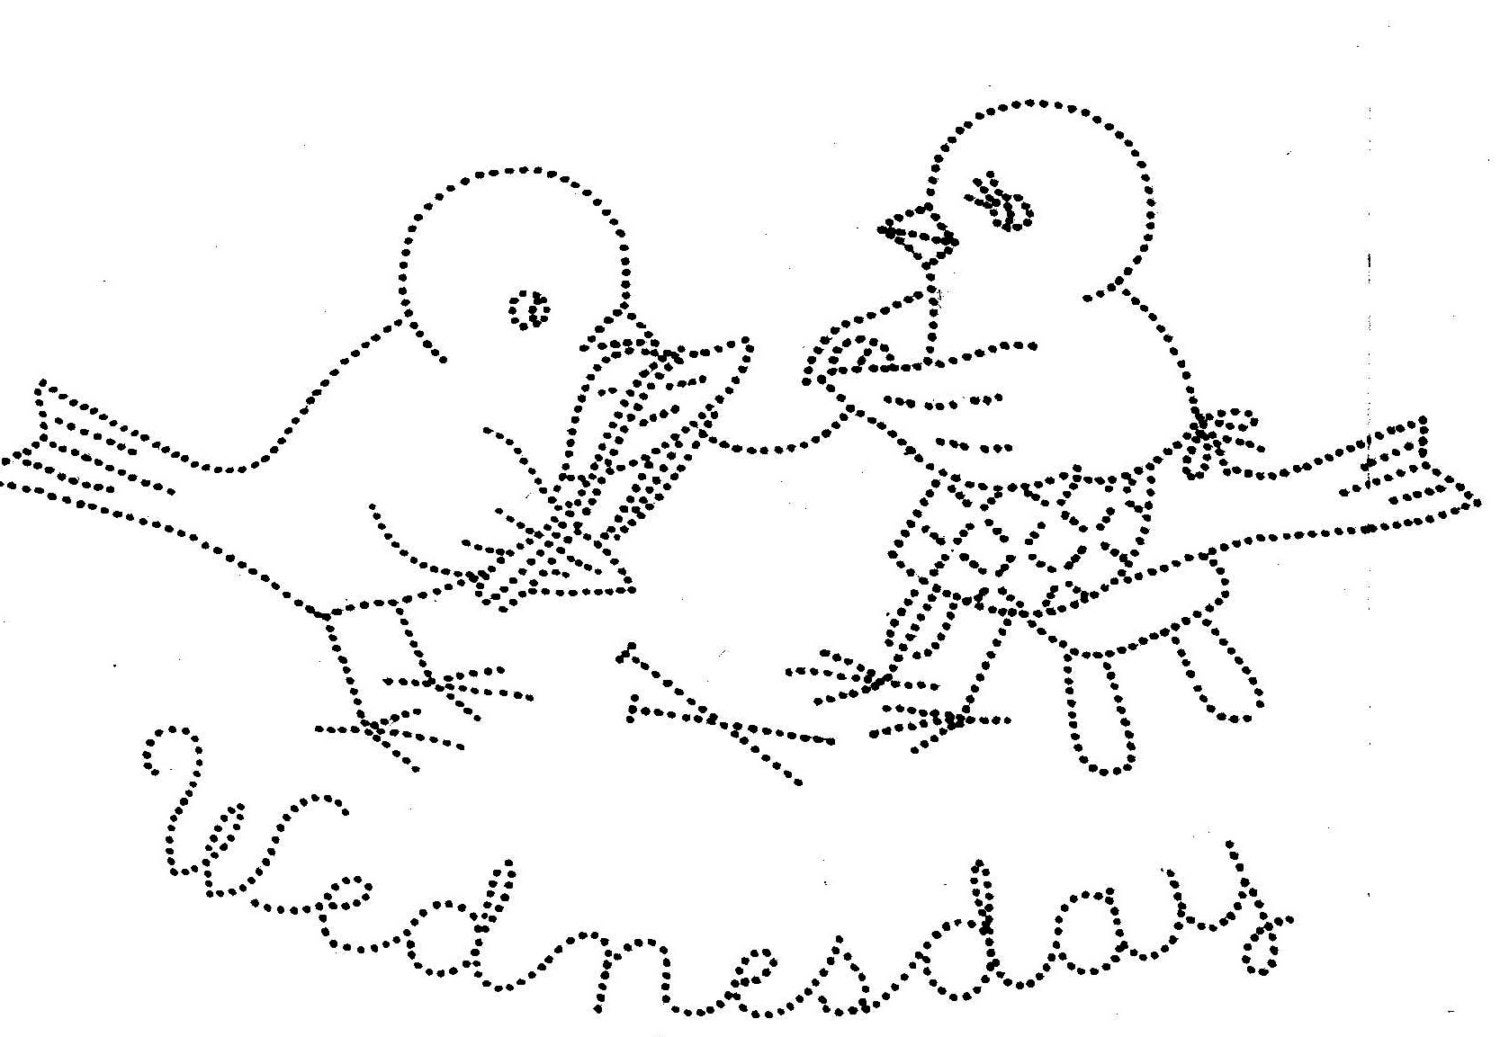 Bird Embroidery Patterns Digital Vintage Hand Embroidery Pattern 1013 Birds For Days Of The Week Dish Towels 1960s Instant Download